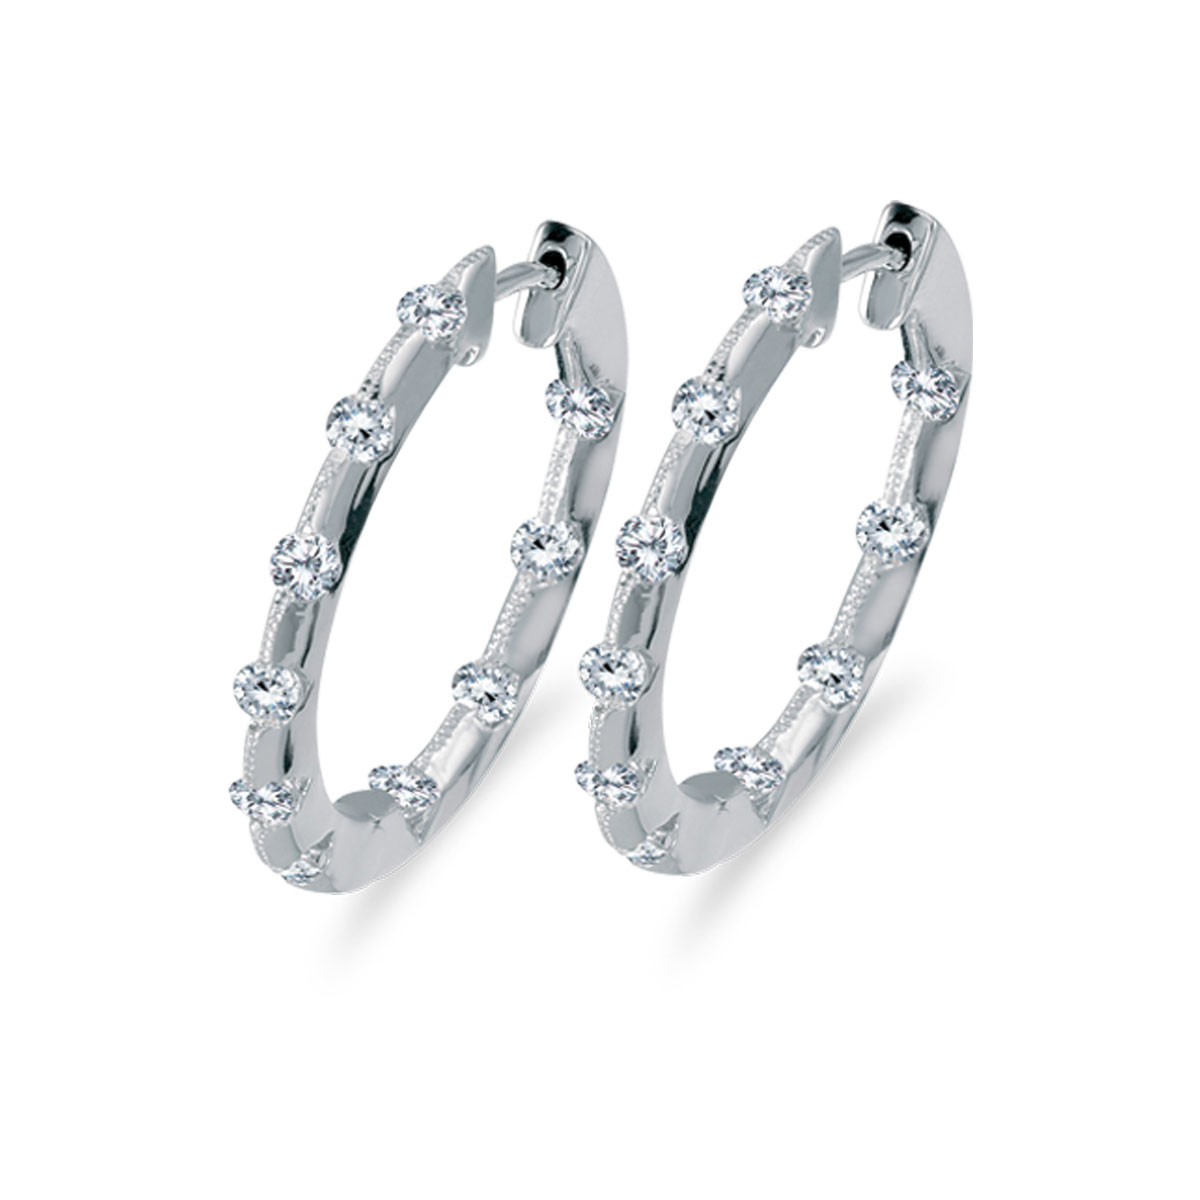 JCX2391: 24 mm diamond inside/outside hoop earrings in beautiful 14k white gold. The perfect look for day or night. 1.00 carat genuine diamonds.